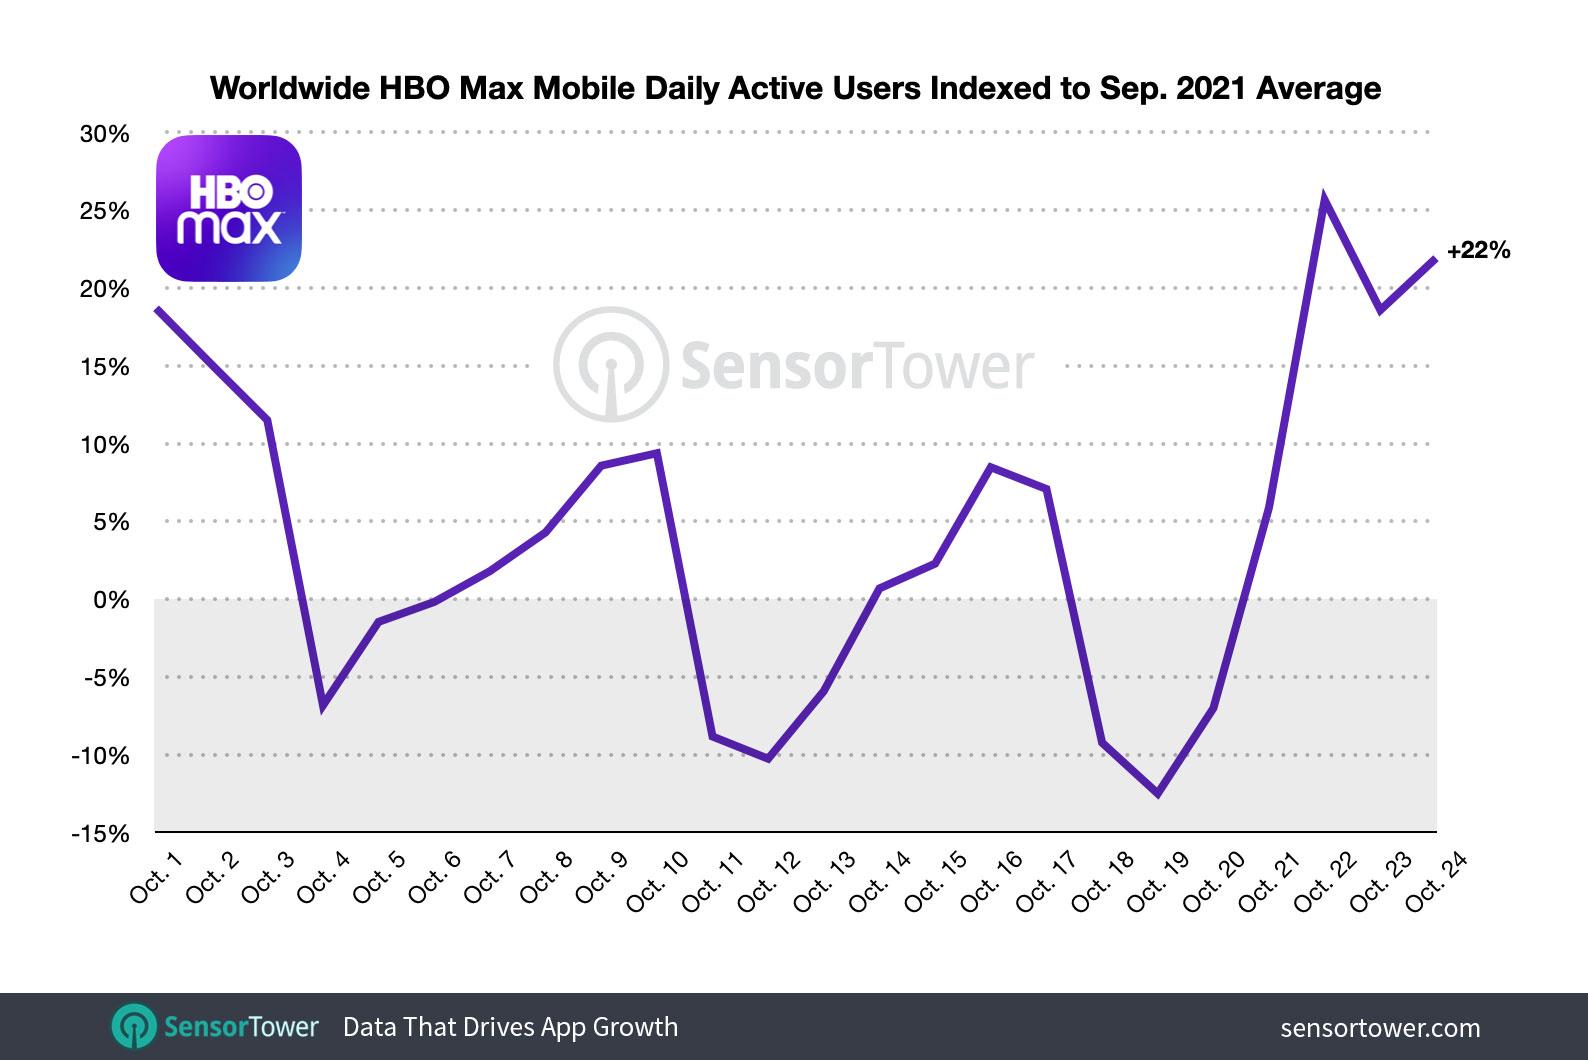 When indexed against the average DAUs in September, HBO Max's daily active users on October 24 had grown by 22 percent.